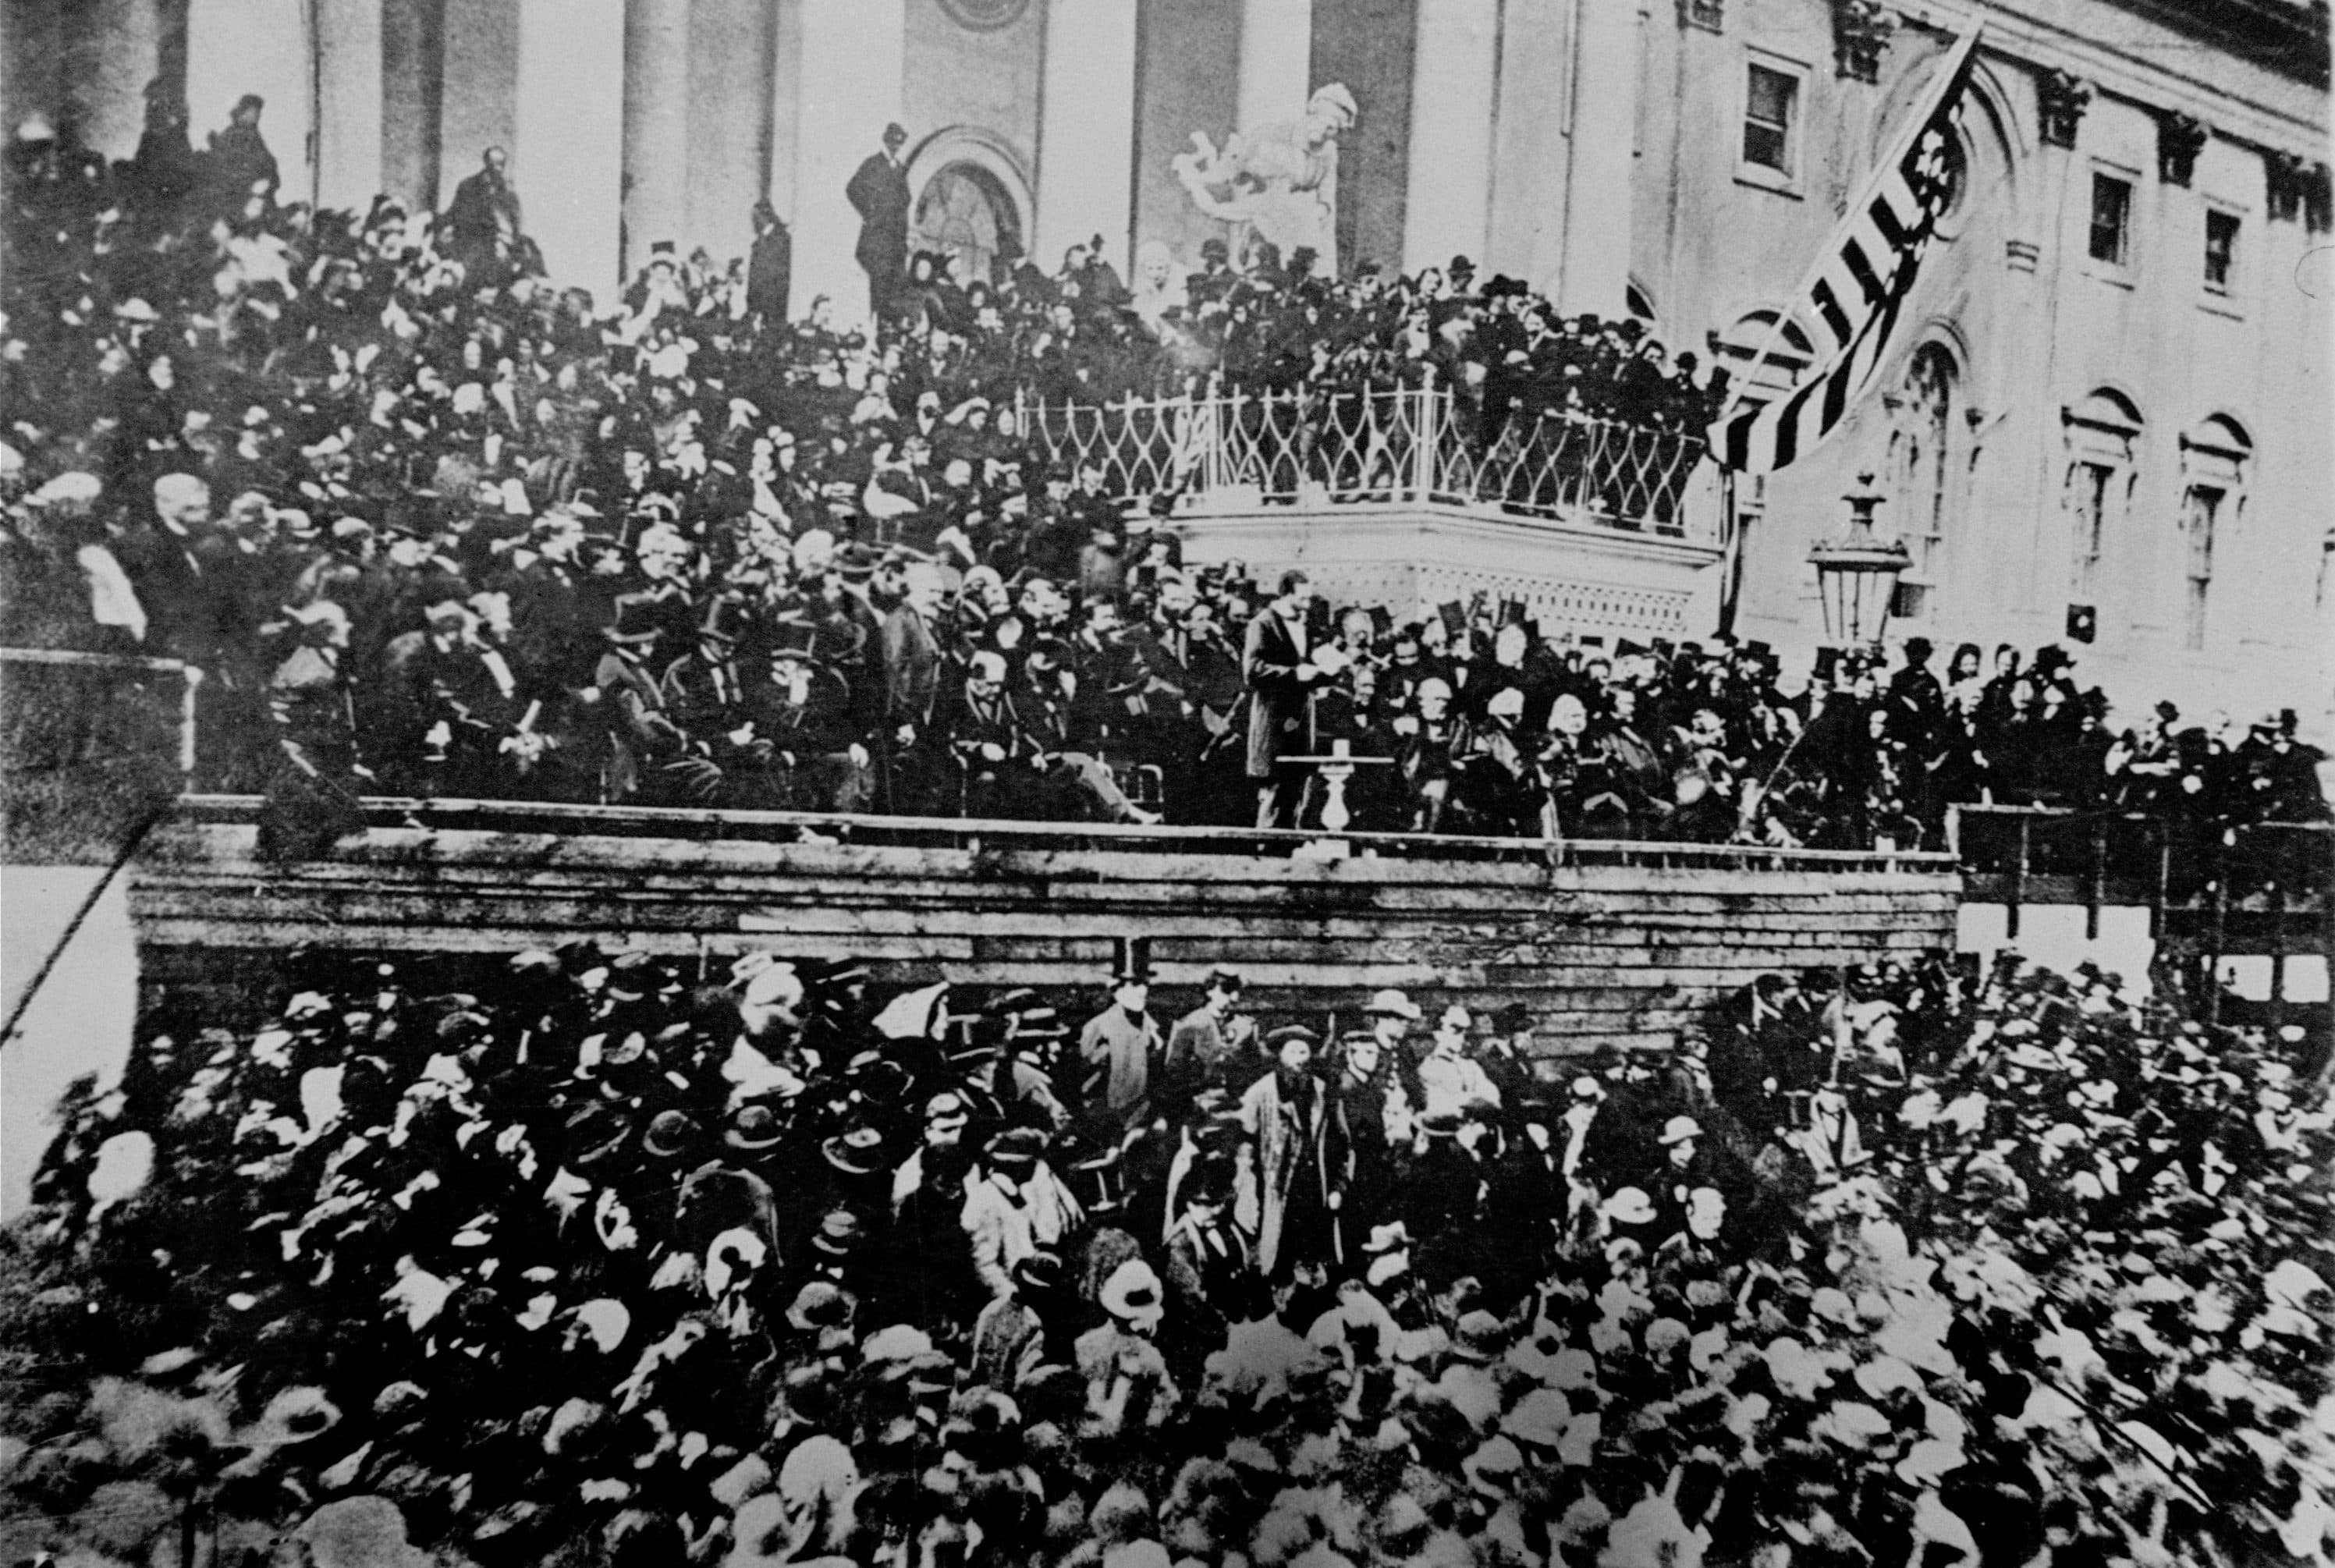 New 8x10 Photo President Abraham Lincoln Delivering 2nd Inaugural Address 1865 